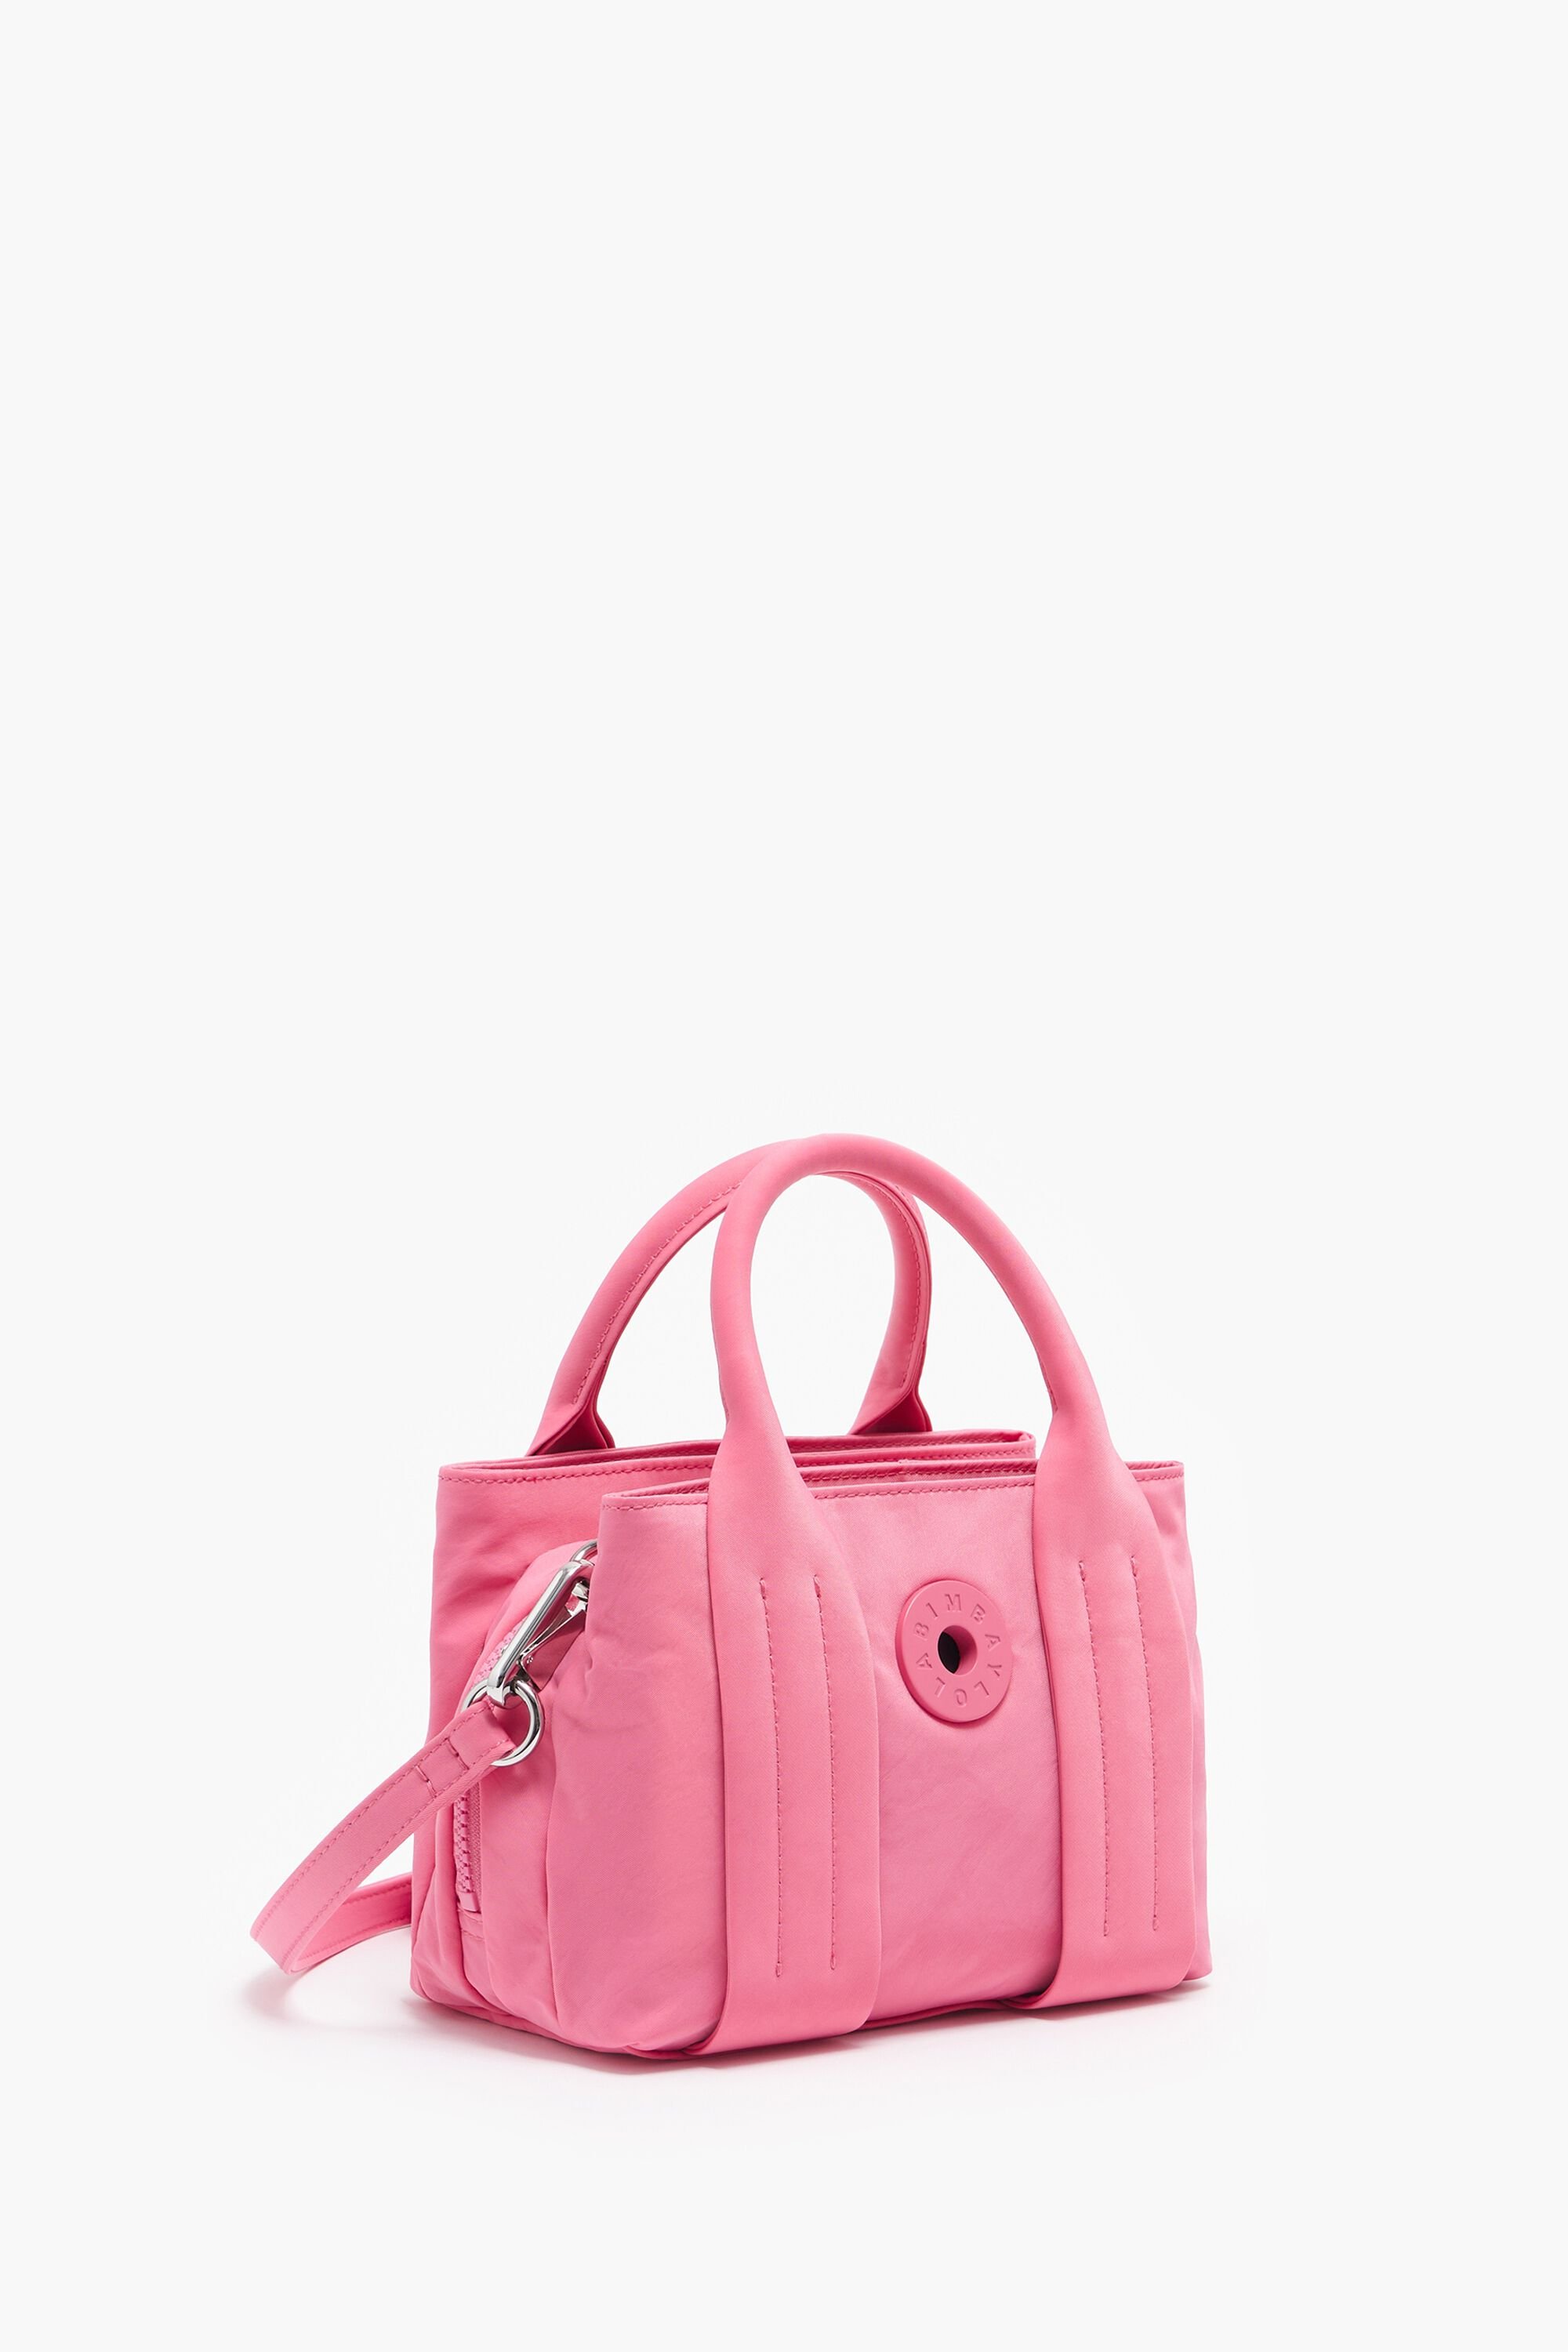 Tote Bimba y Lola Pink in Synthetic - 35336006